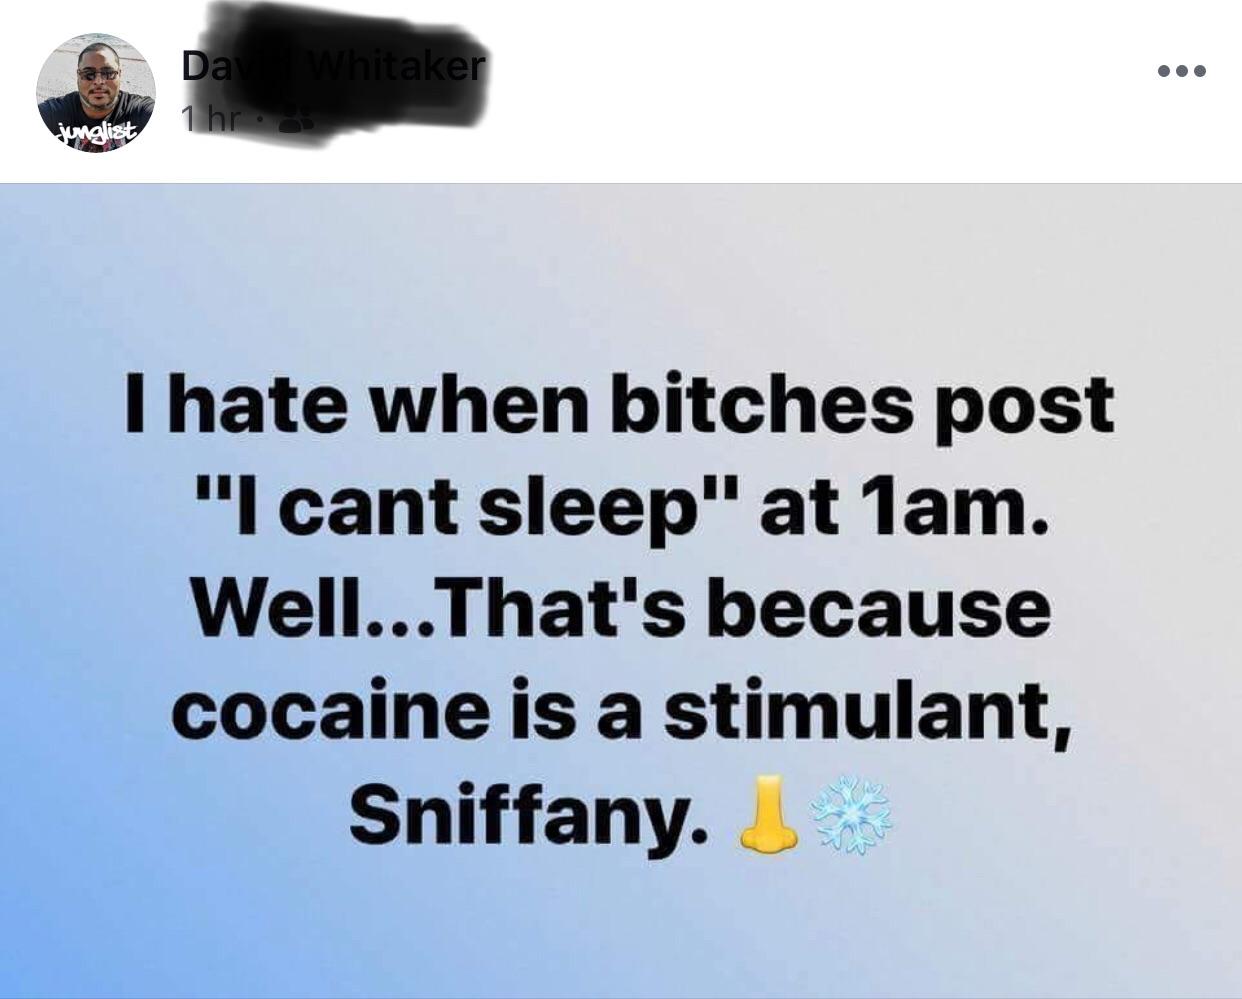 memes - cocaine sniffany meme - Day Whitaker 1 hrou I hate when bitches post "I cant sleep" at 1am. Well... That's because cocaine is a stimulant, Sniffany. Je